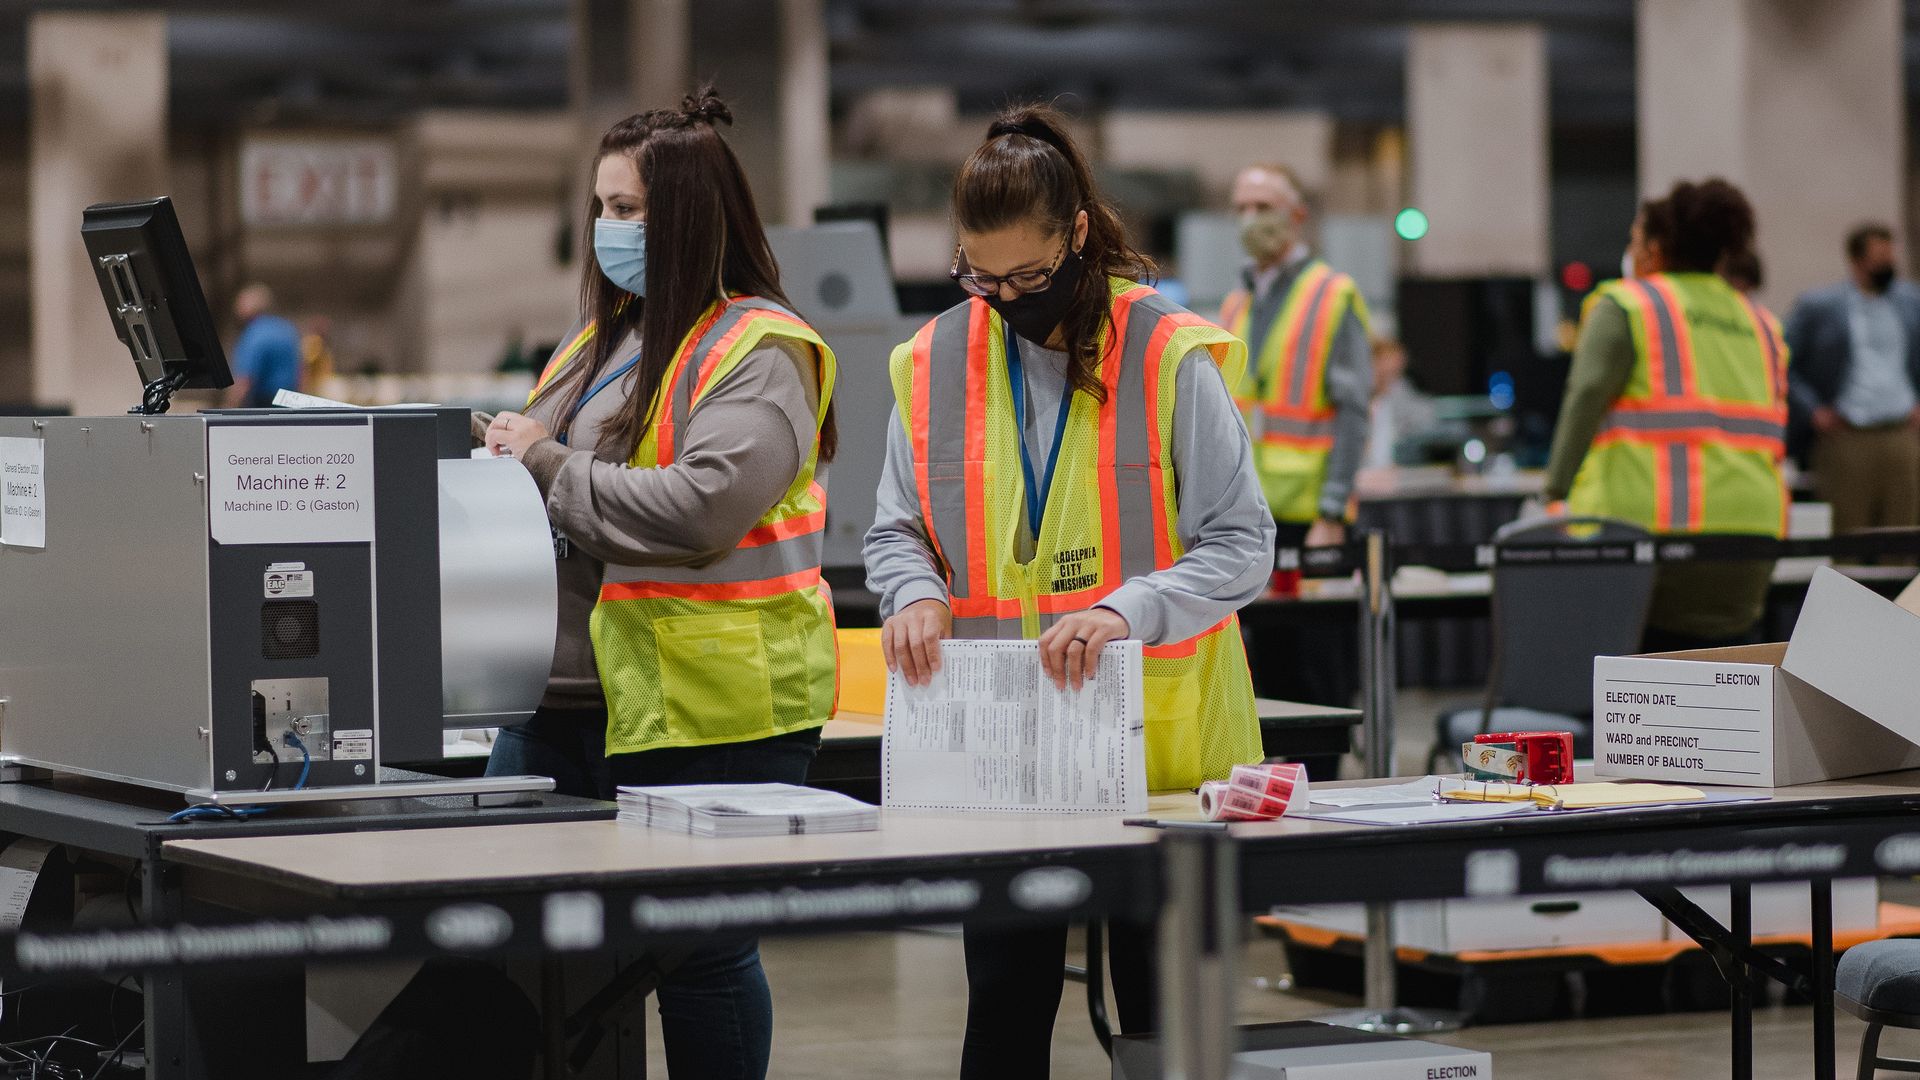 Workers count ballots for the 2020 Presidential election at the Philadelphia Convention Center in Philadelphia, Pennsylvania, U.S., on Tuesday, Nov. 3, 2020